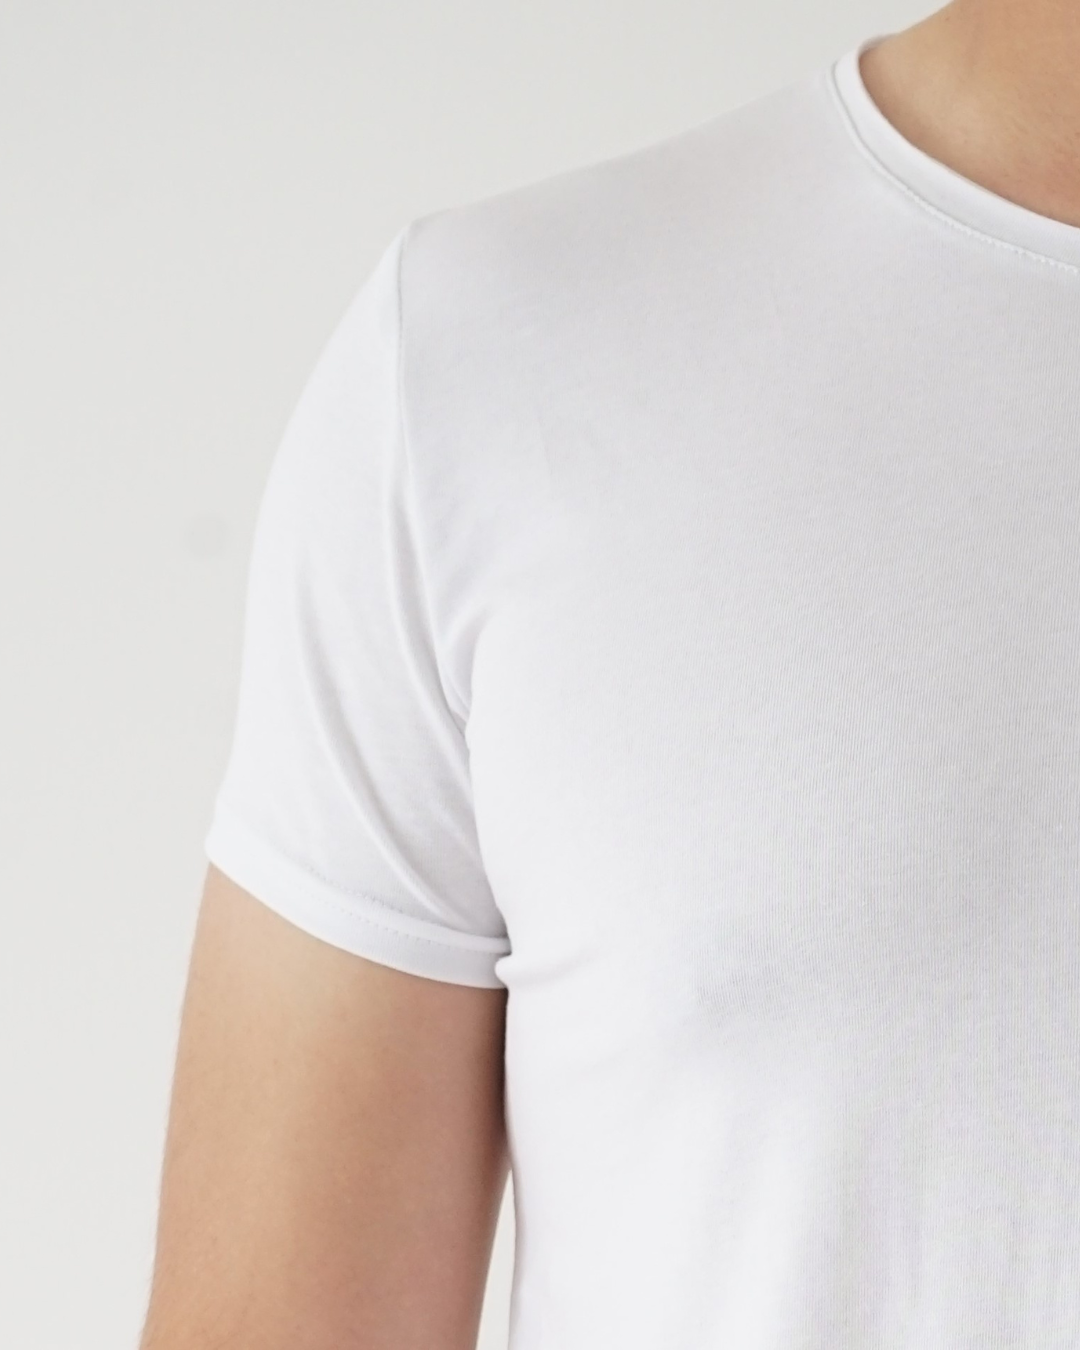 White T-shirt - Short Sleeve Wide Neck Curved Bottom